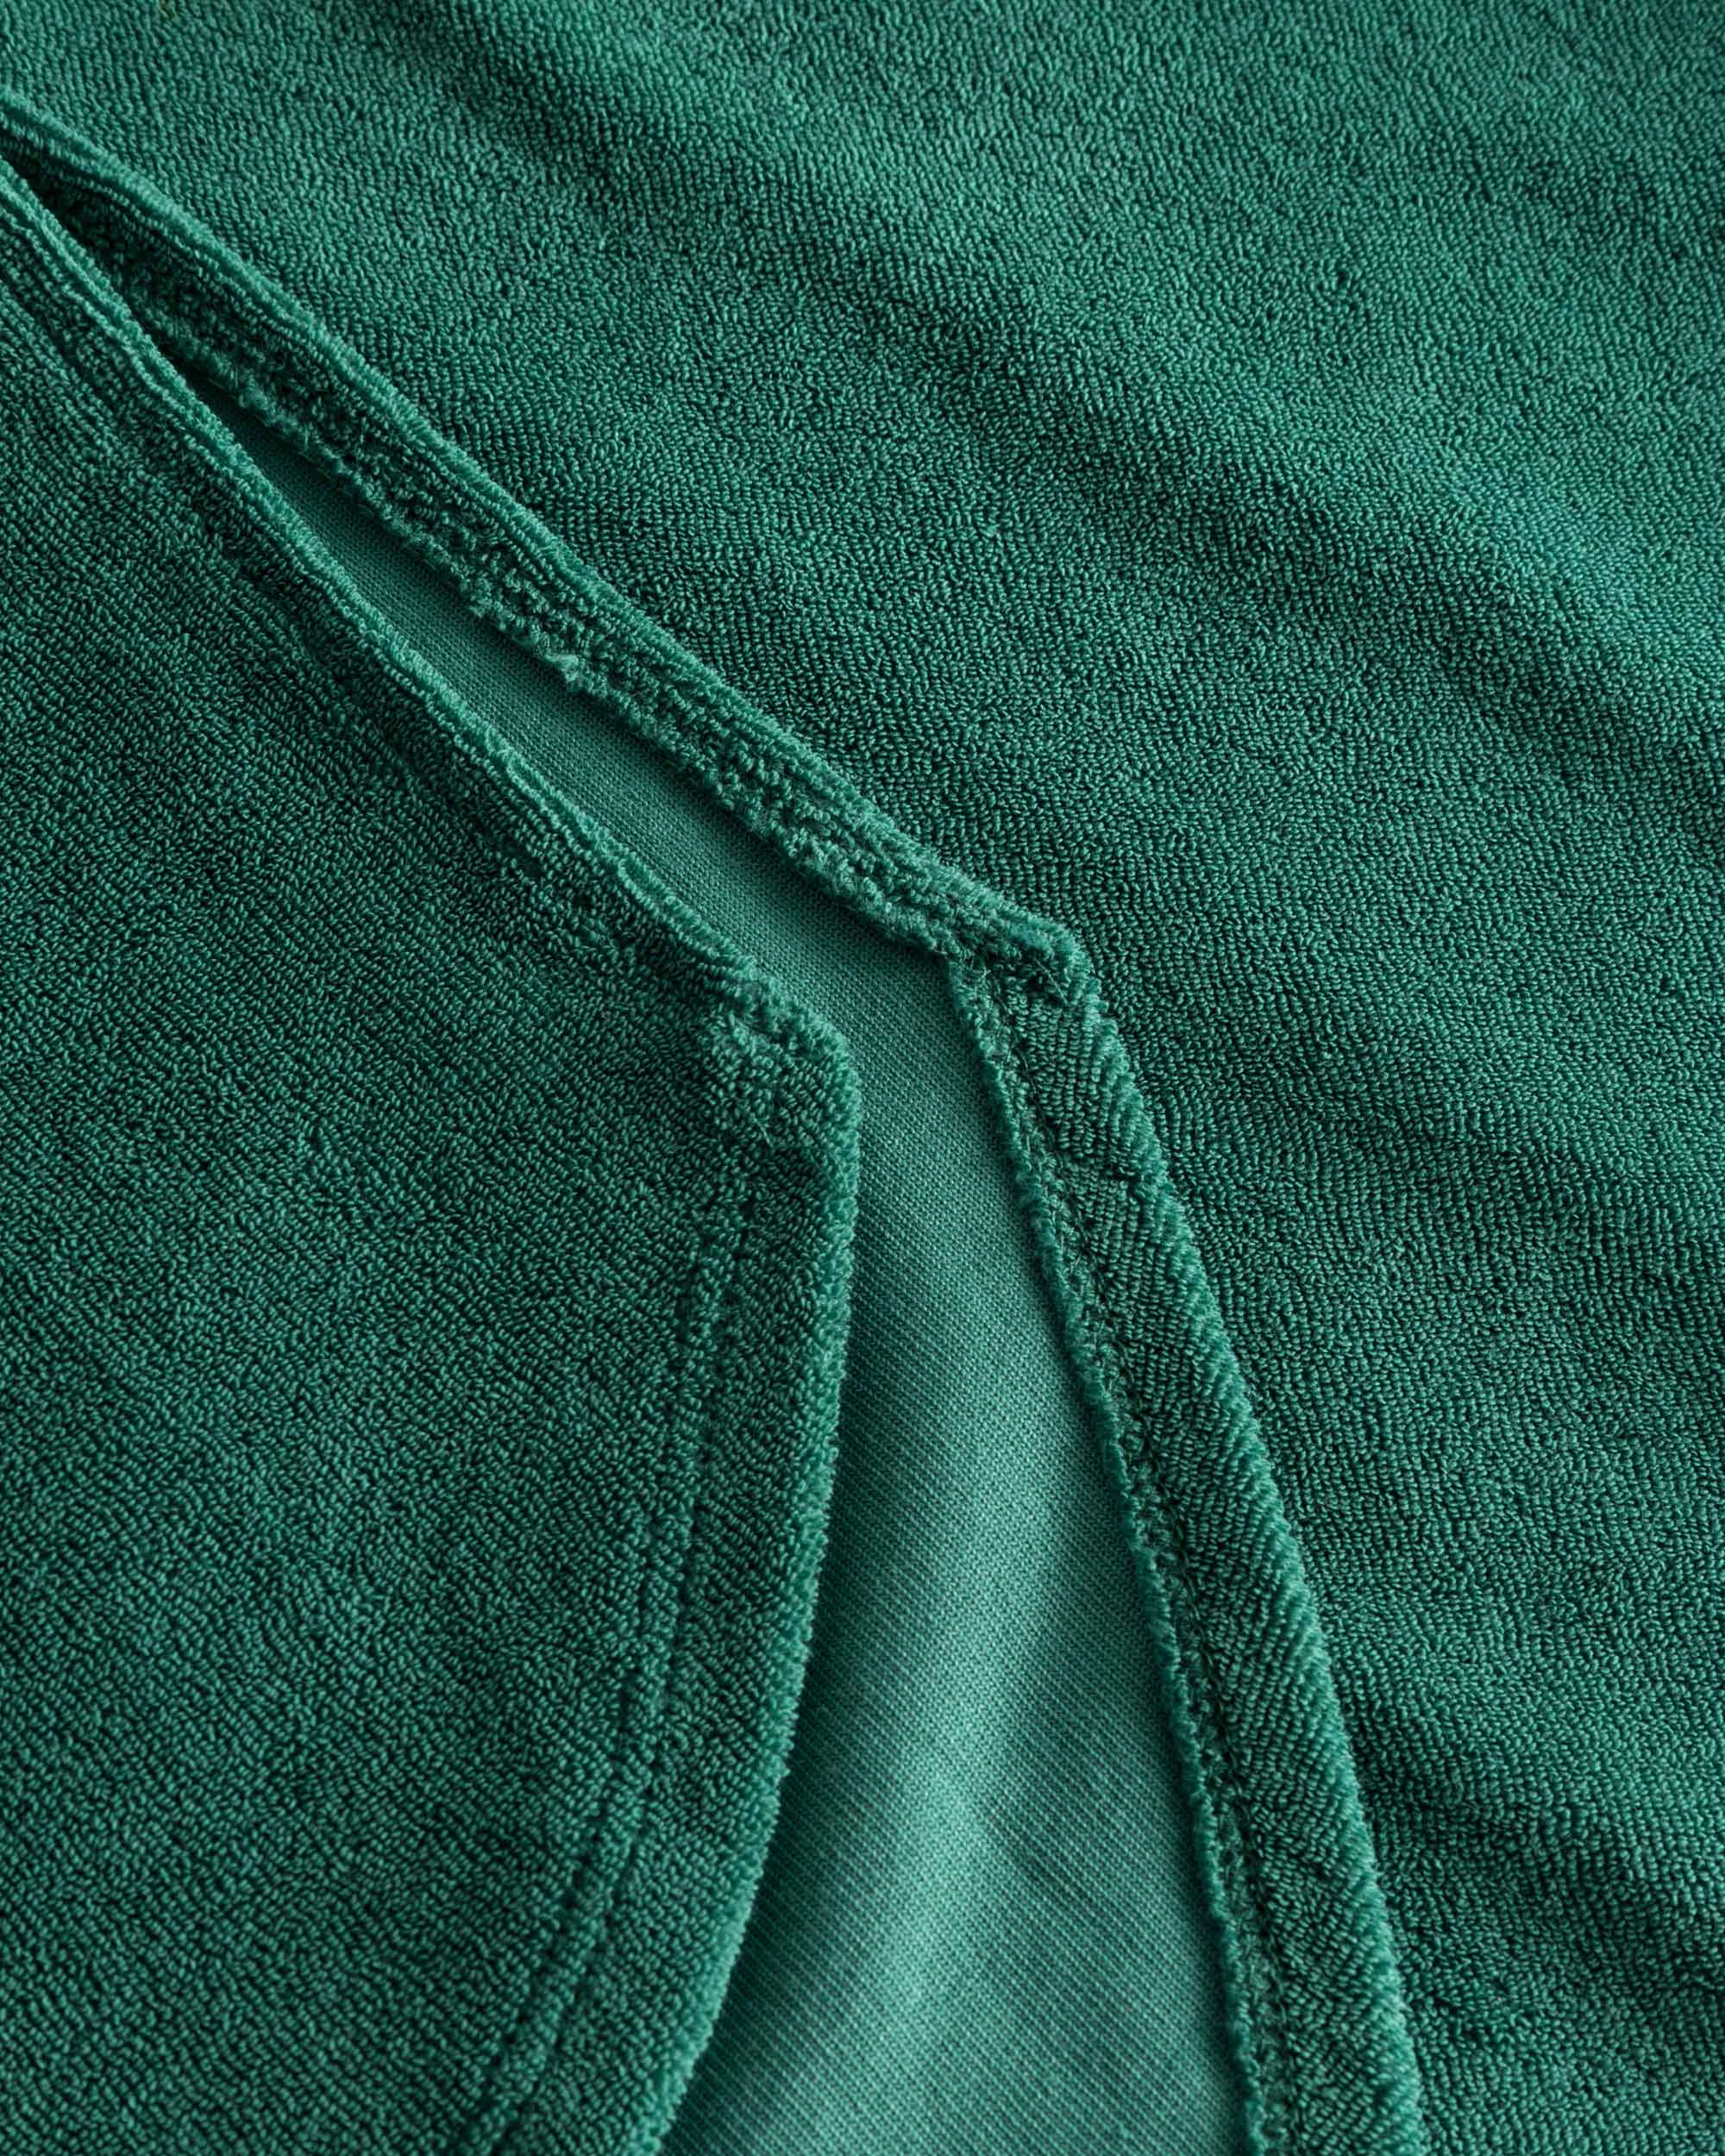 Close up on stitchings on a green kaftan in terry toweling fabric.